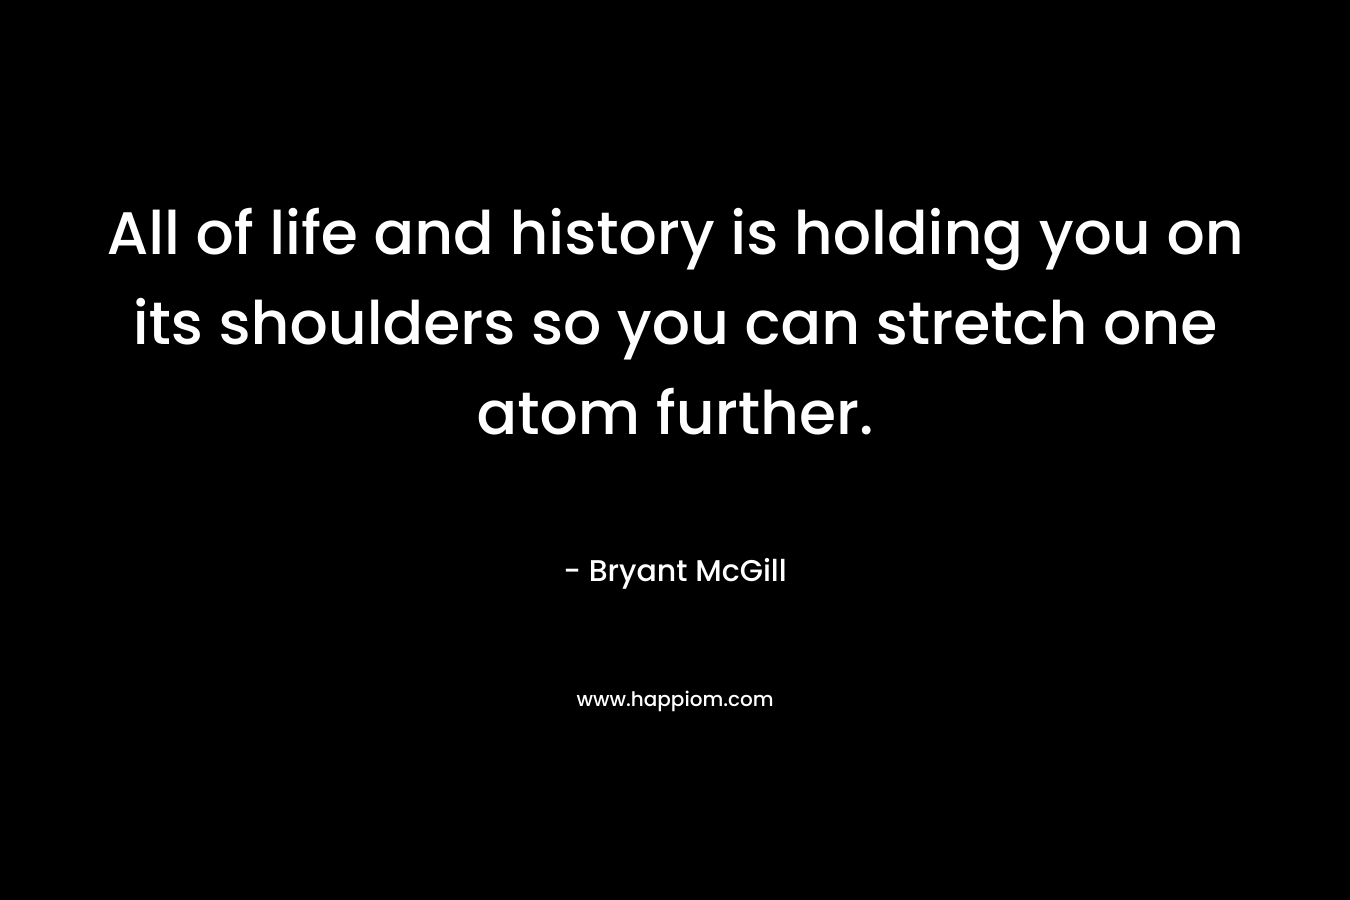 All of life and history is holding you on its shoulders so you can stretch one atom further. – Bryant McGill